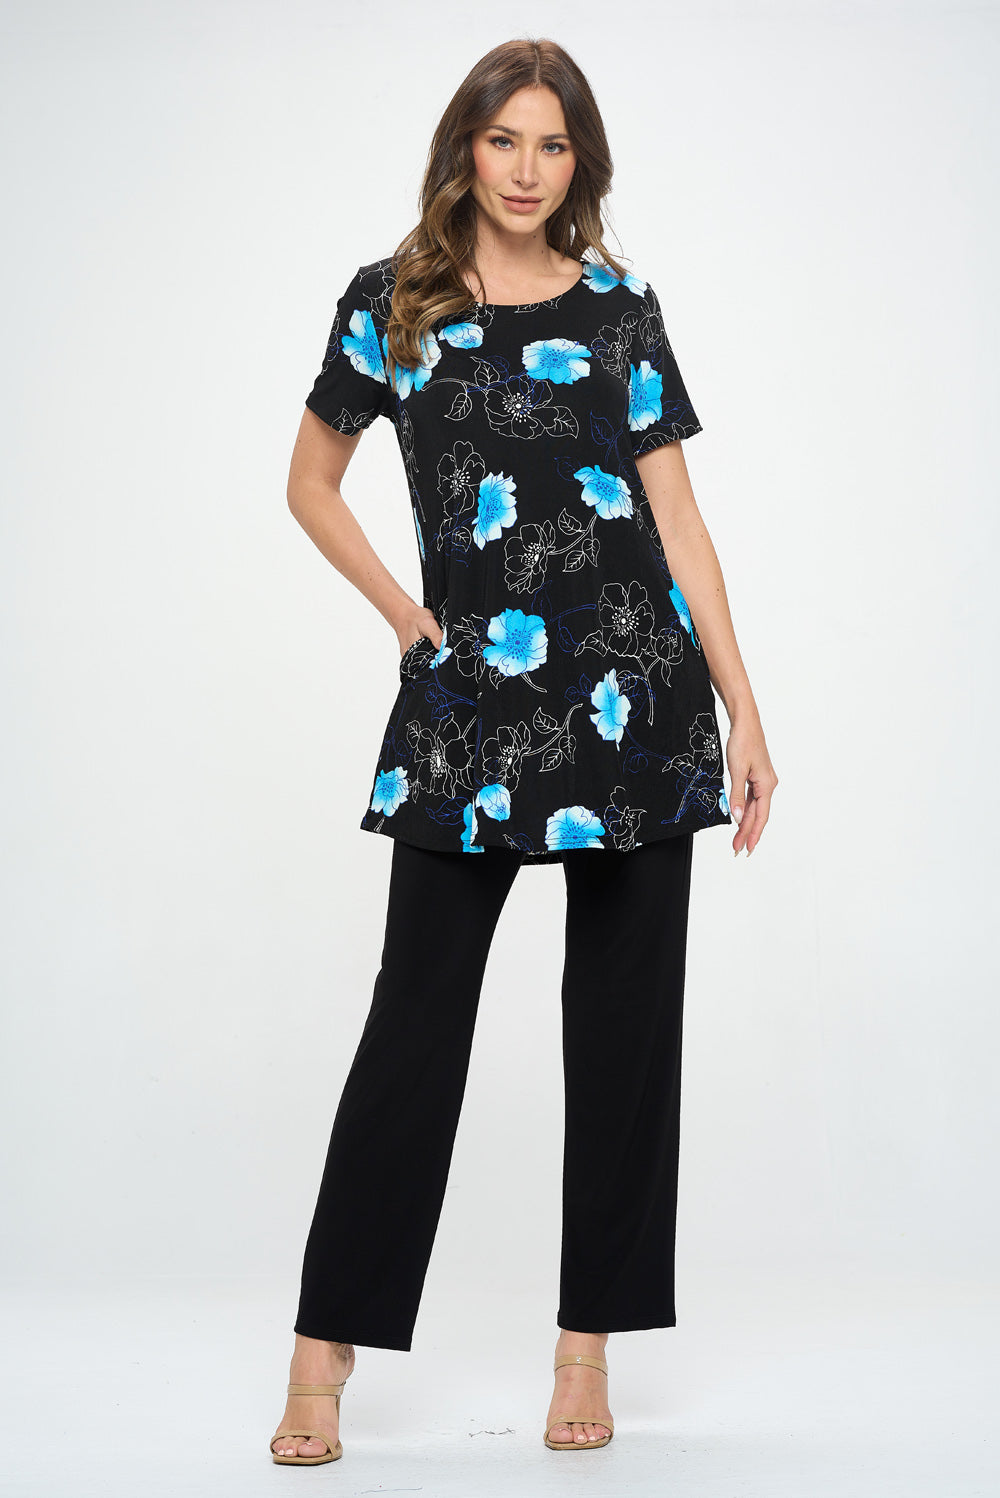 Floral Outline Print Short Sleeve Top with Side Seam Pockets-3086BN-SRP1-K-W380